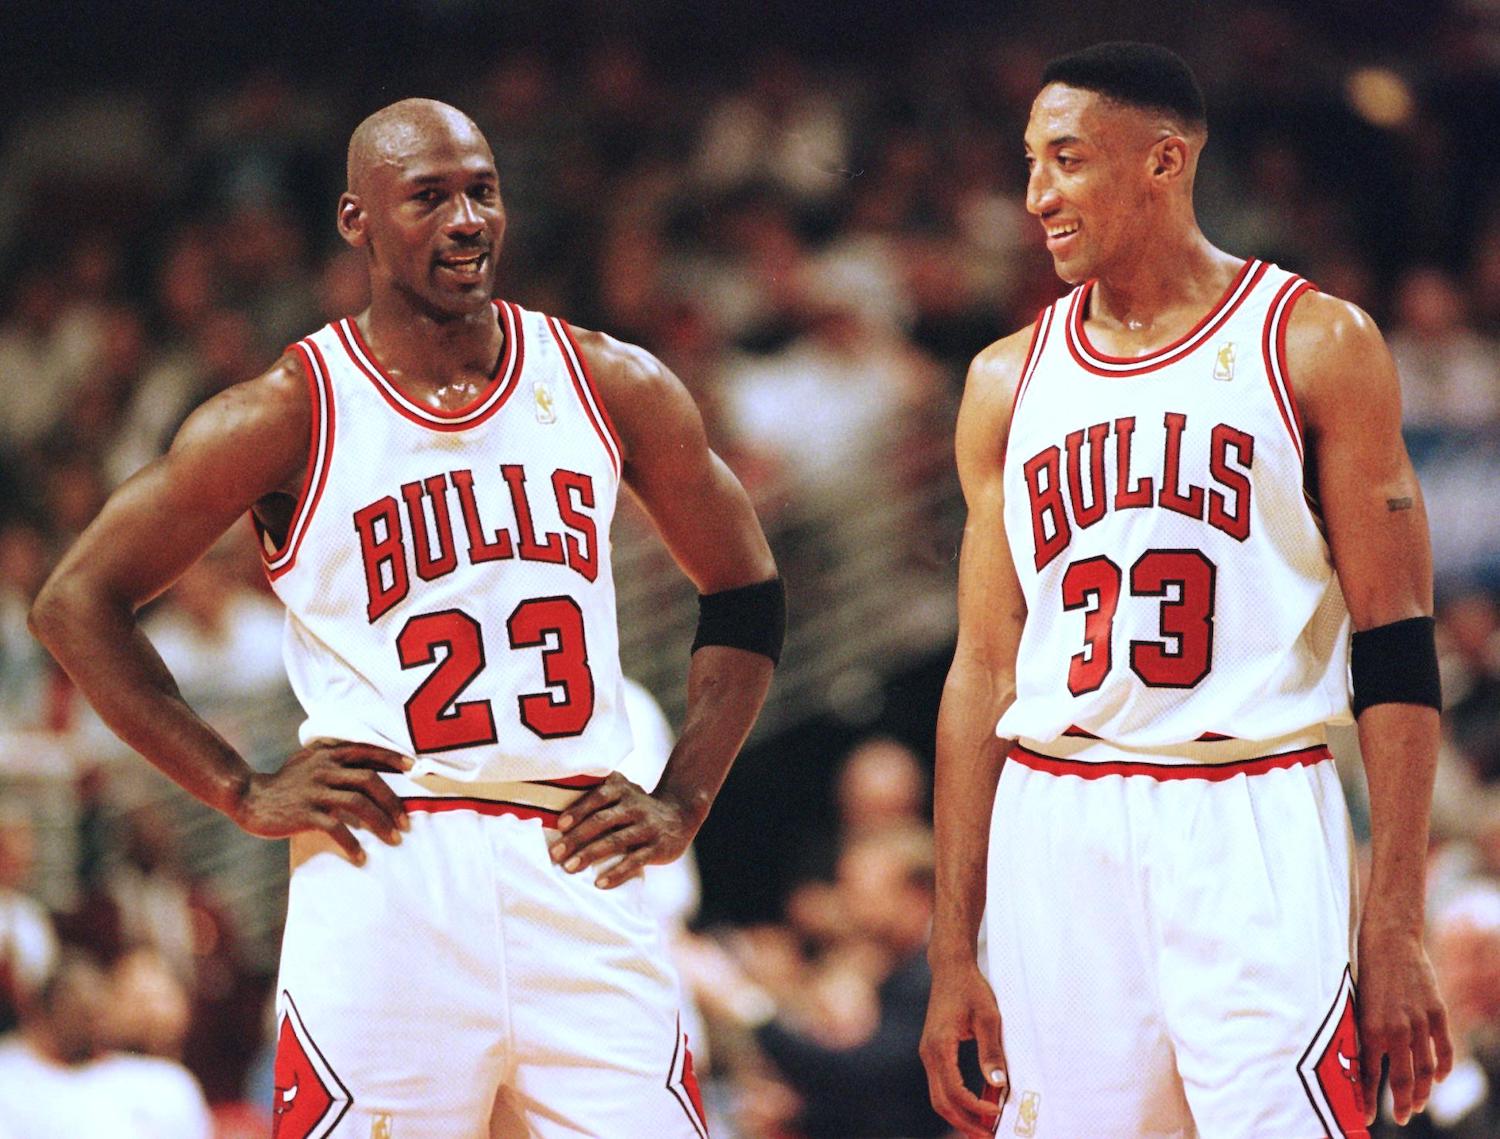 Chicago Bulls stars Michael Jordan and Scottie Pippen stand together on the court.